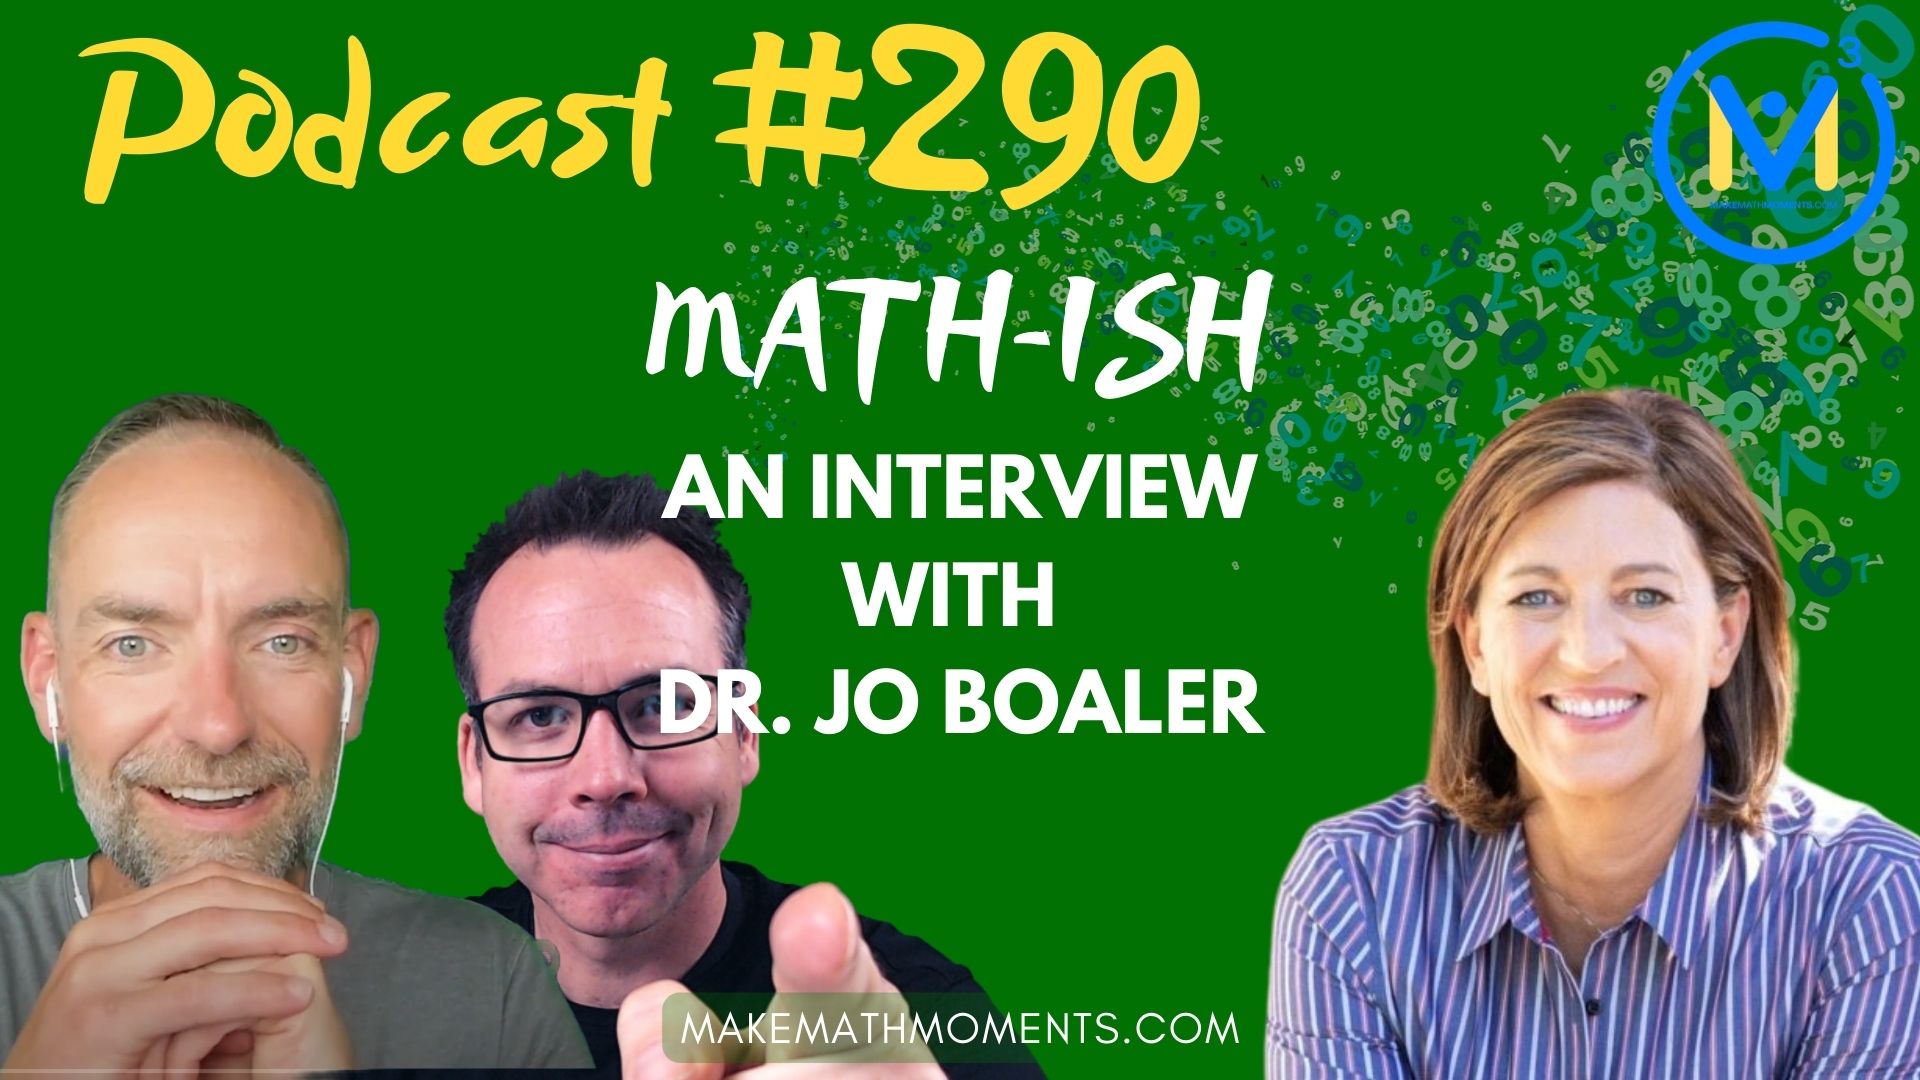 Episode #290: Math-ish: An Interview with Dr. Jo Boaler